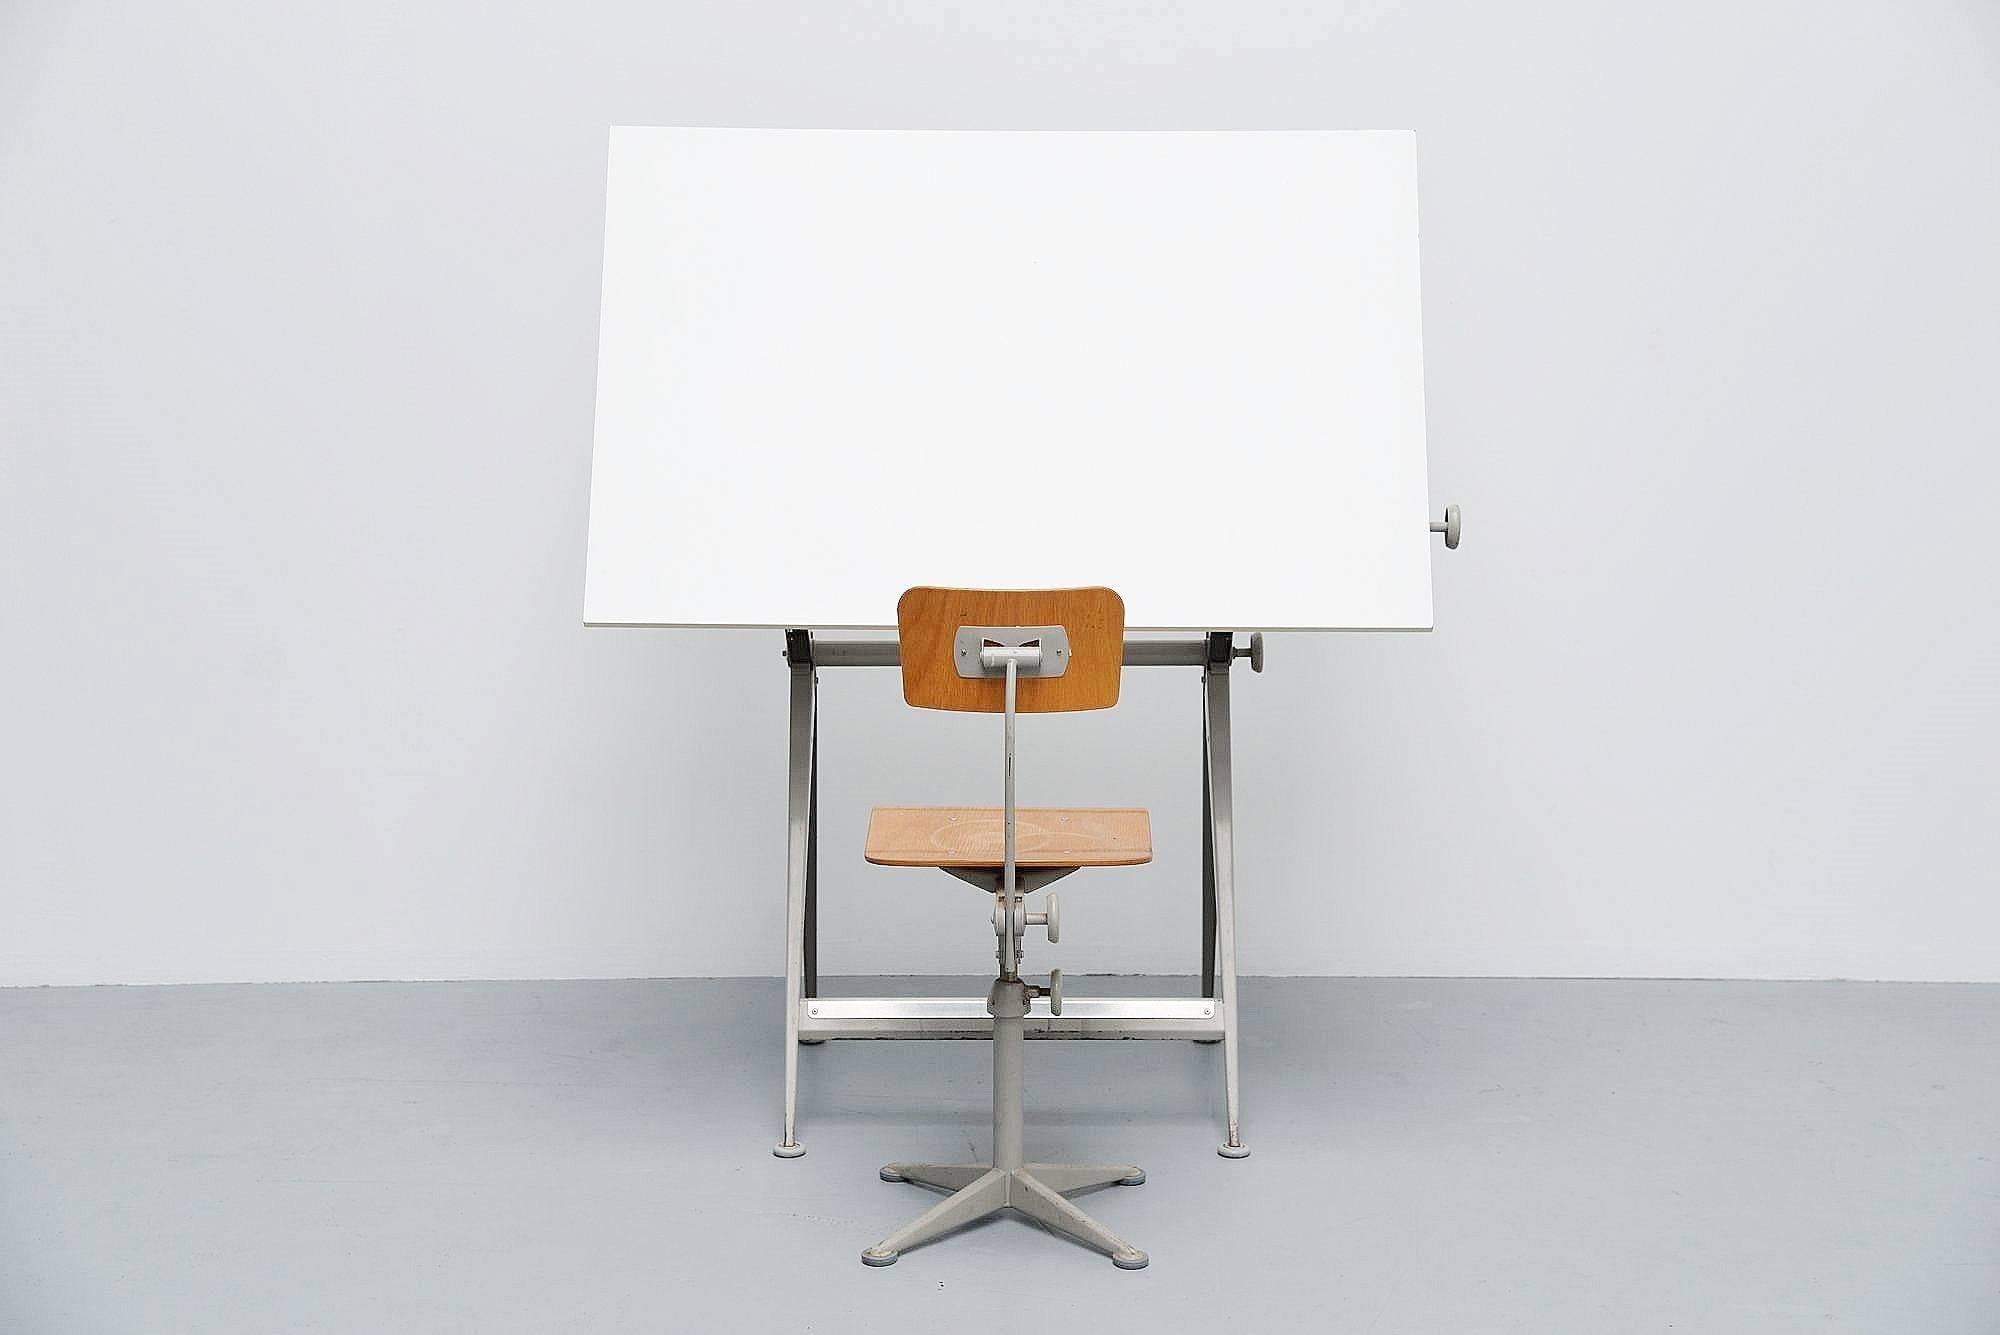 Wim Rietveld Friso Kramer Drafting Table, 1963 In Excellent Condition In Roosendaal, Noord Brabant